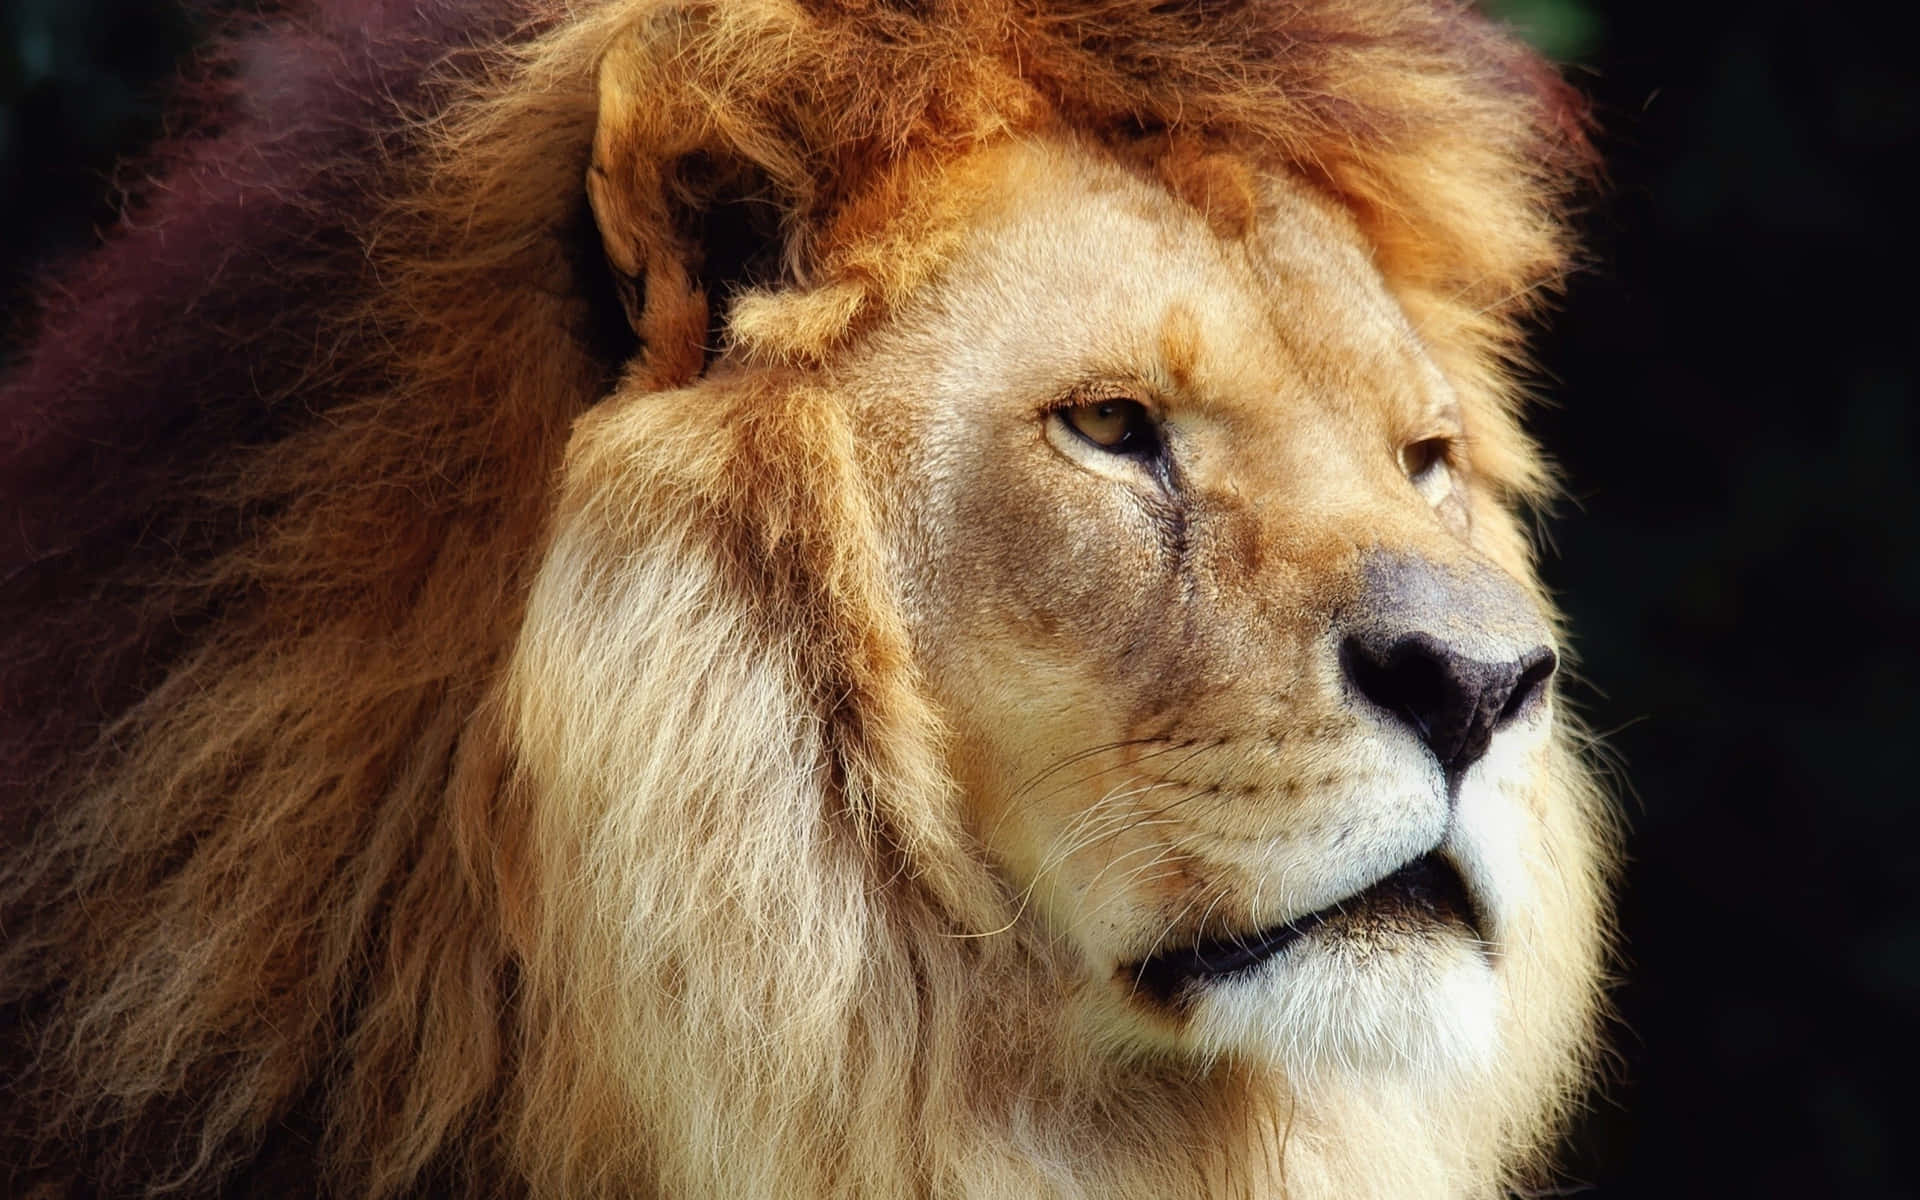 A Close Up Of A Lion Looking At The Camera